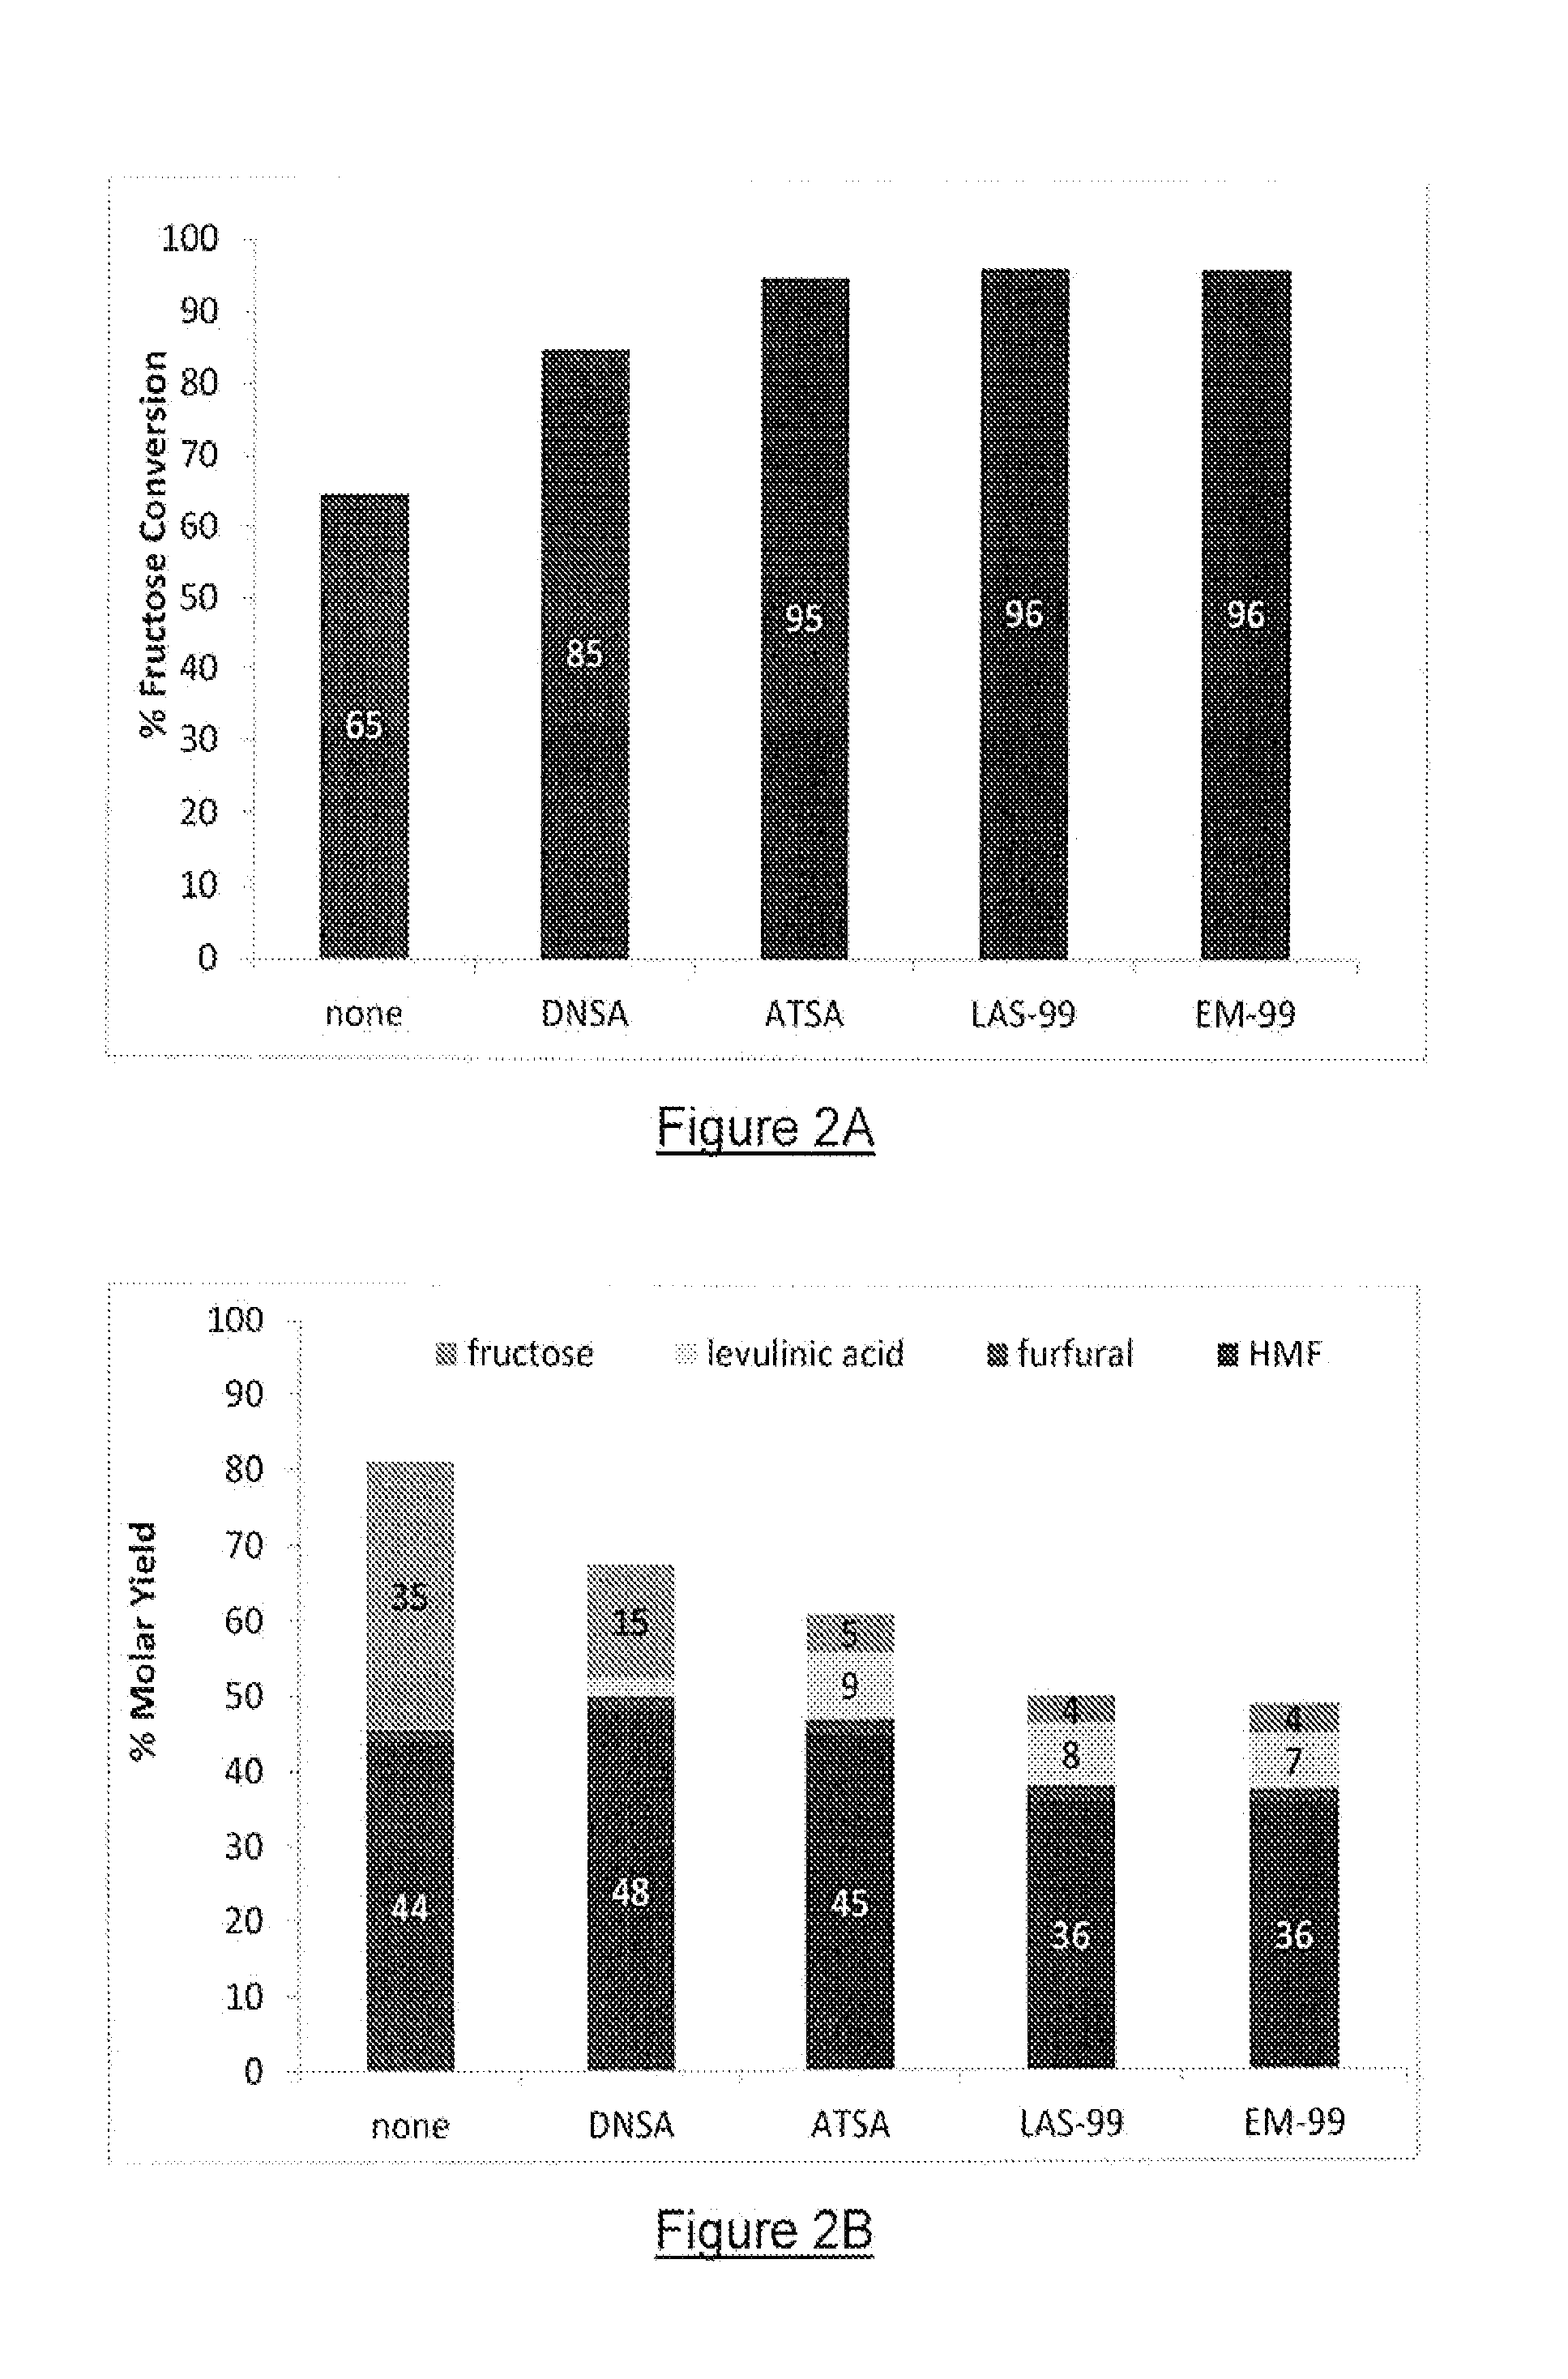 Processes for making sugar and/or sugar alcohol dehydration products